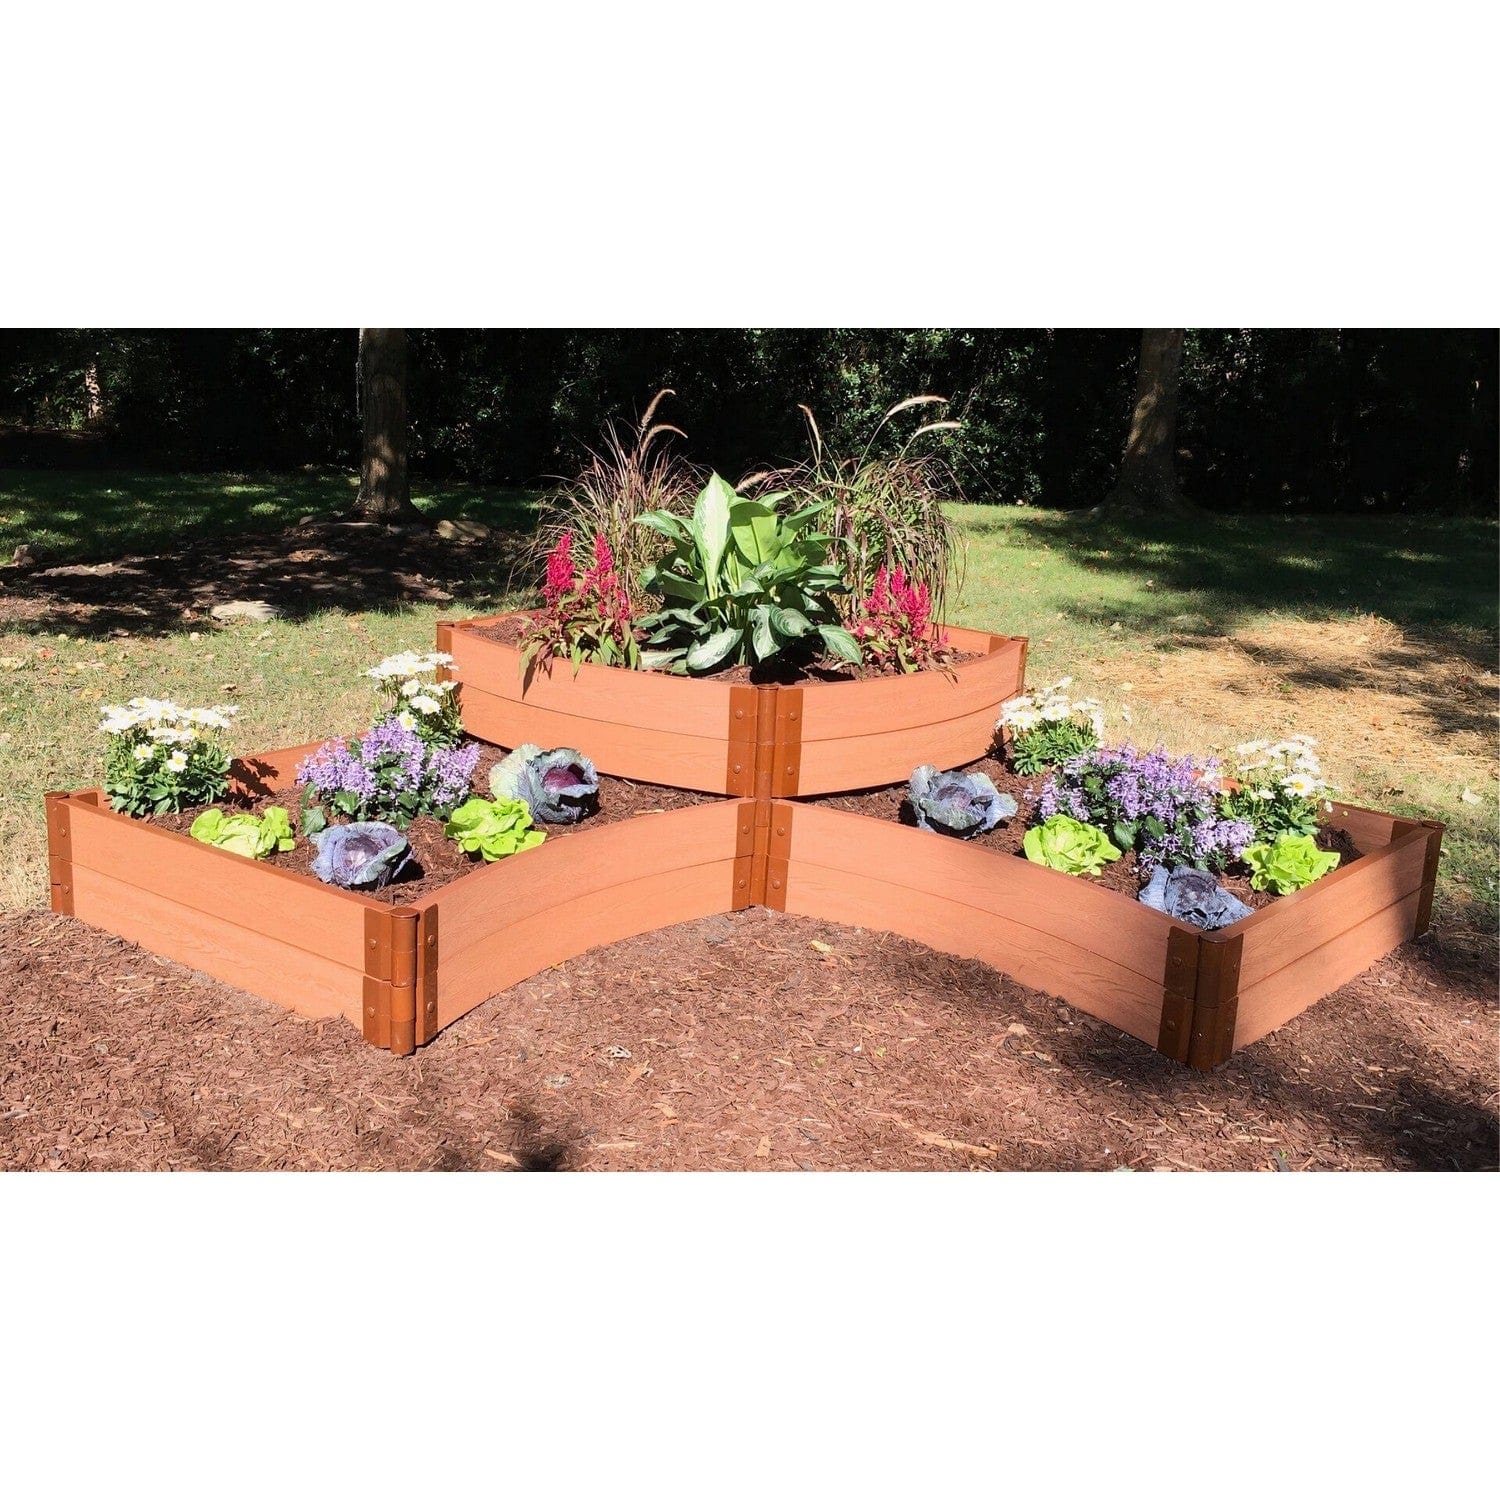 Frame It All Gardening Accessories Frame It All | Tool-Free Teardrop Curved Corner Raised Garden Bed (2-Tier) 8' X 8' X 11" - Uptown Brown - 1" Profile 800002008